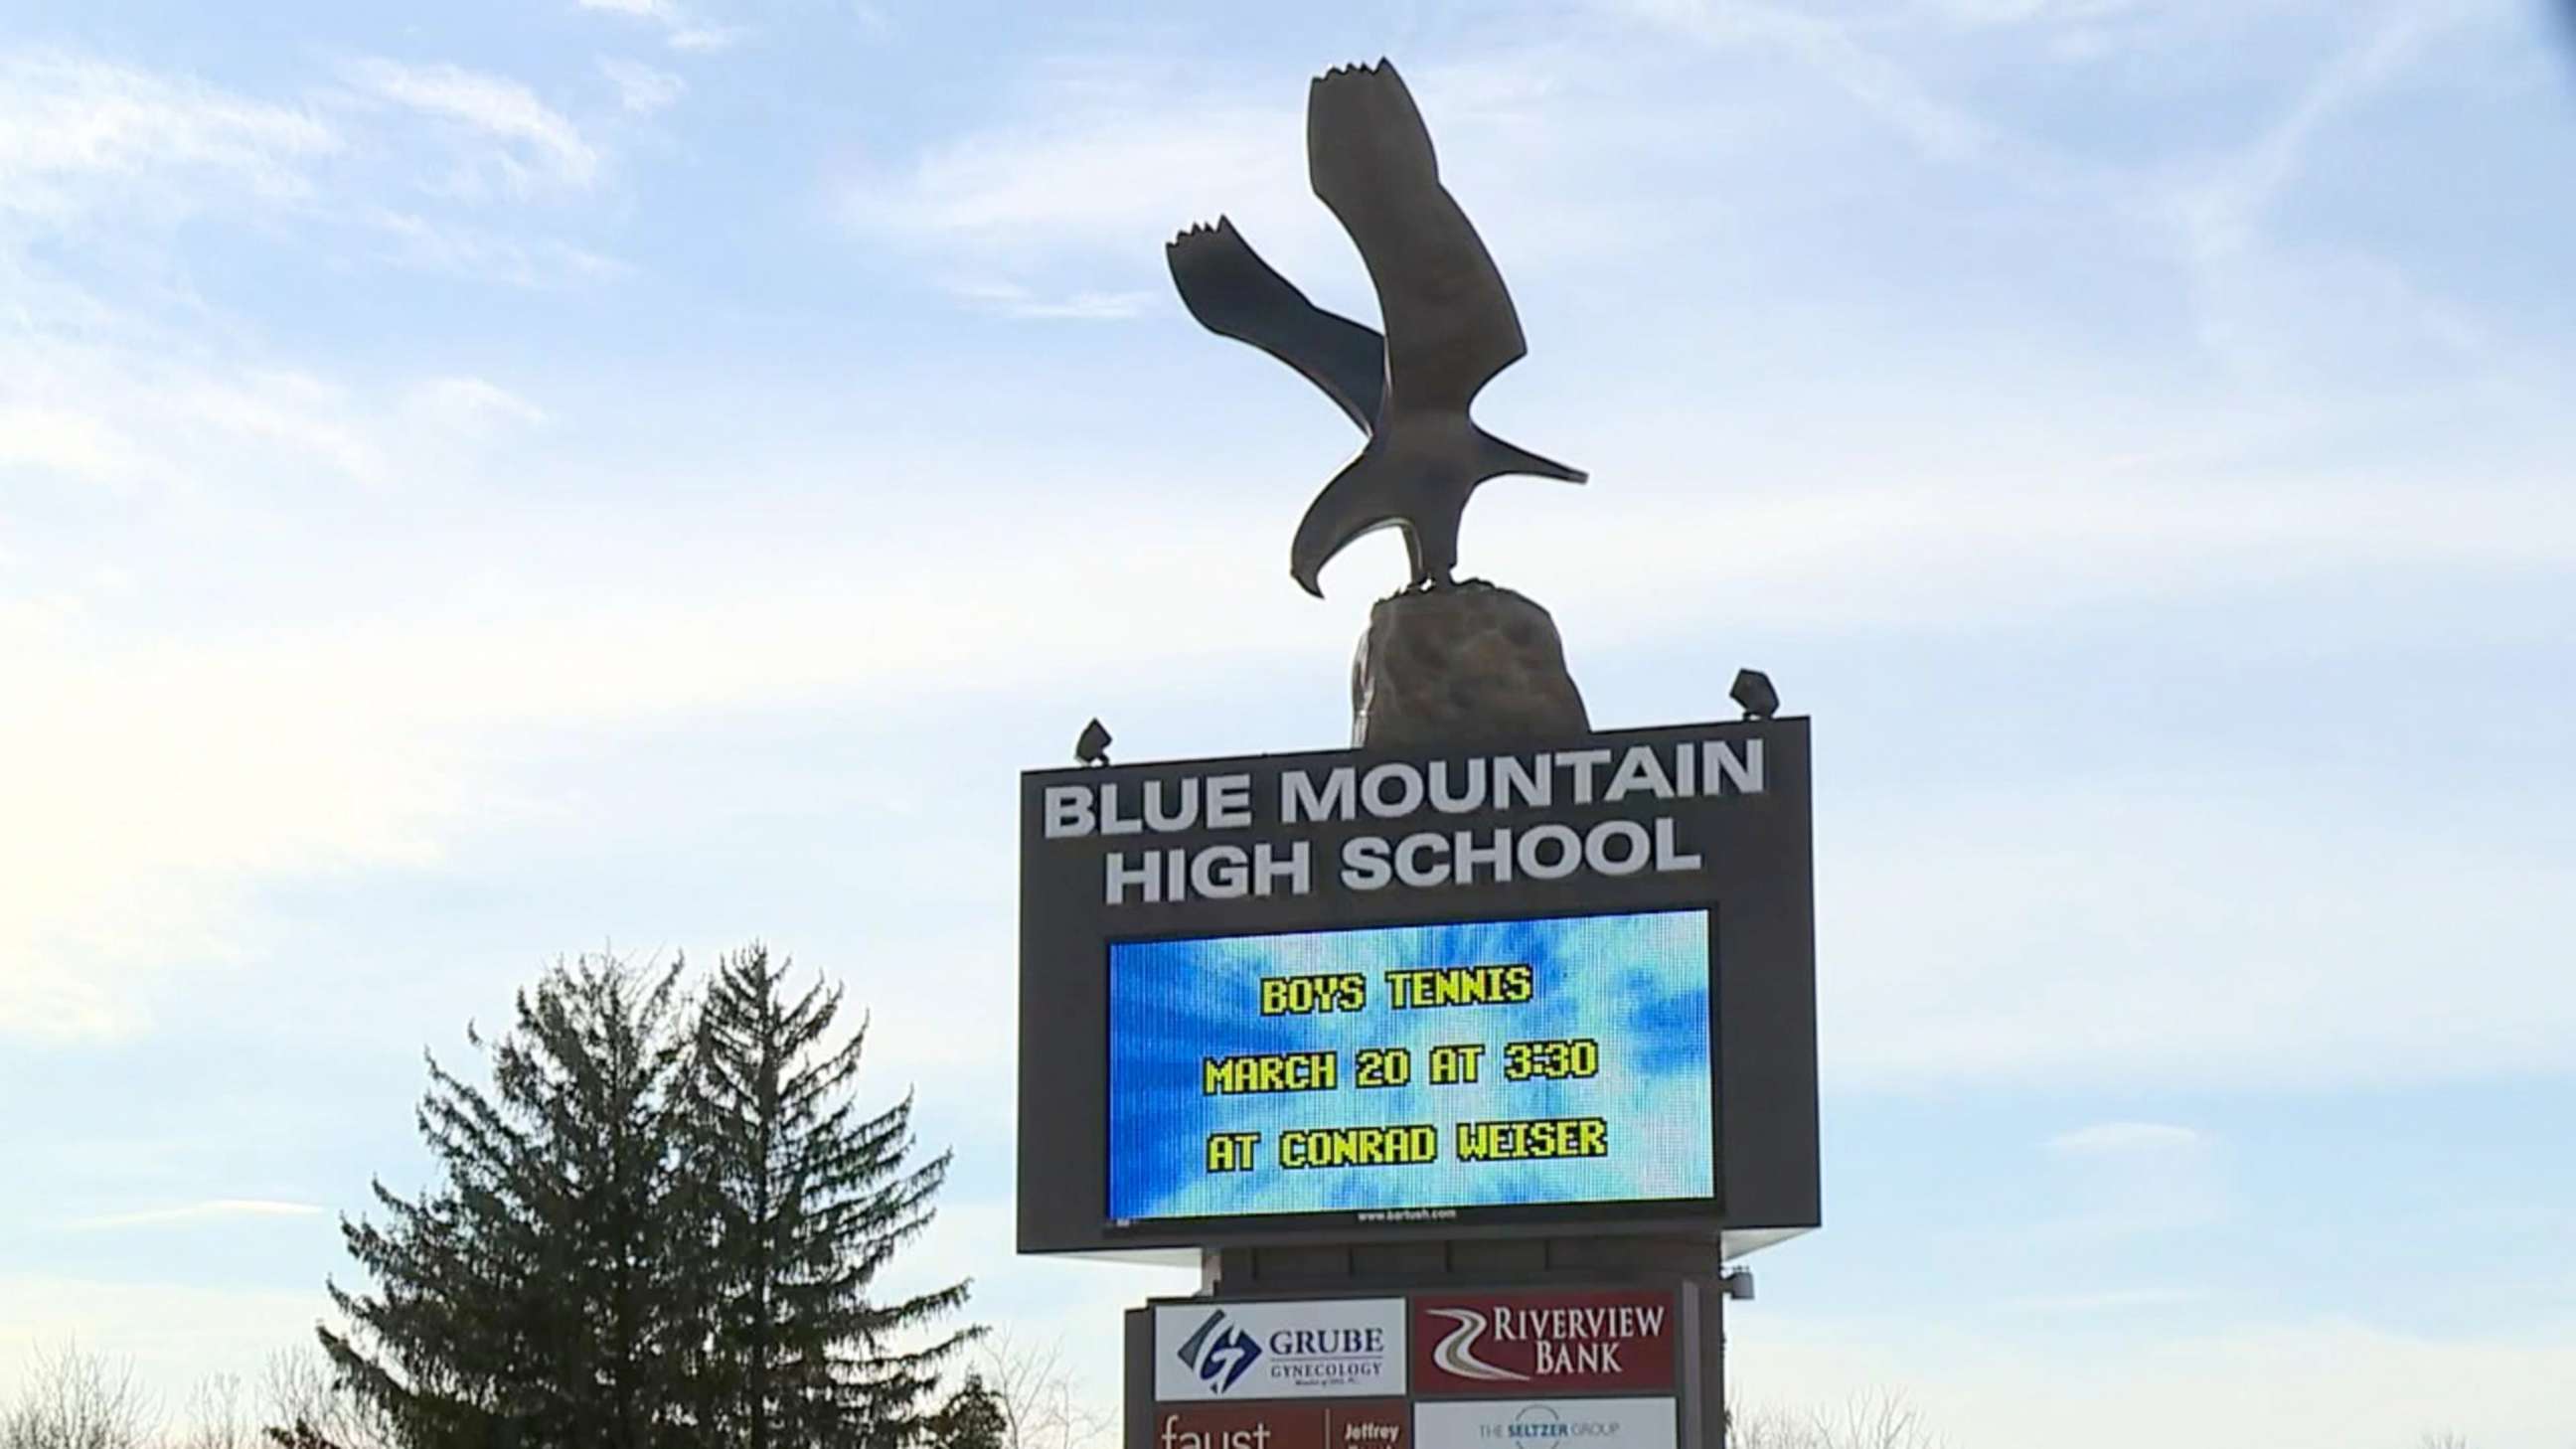 PHOTO: The Blue Mountain School District in Pa., has armed students with rocks to fight off school shooters, the superintendent said.